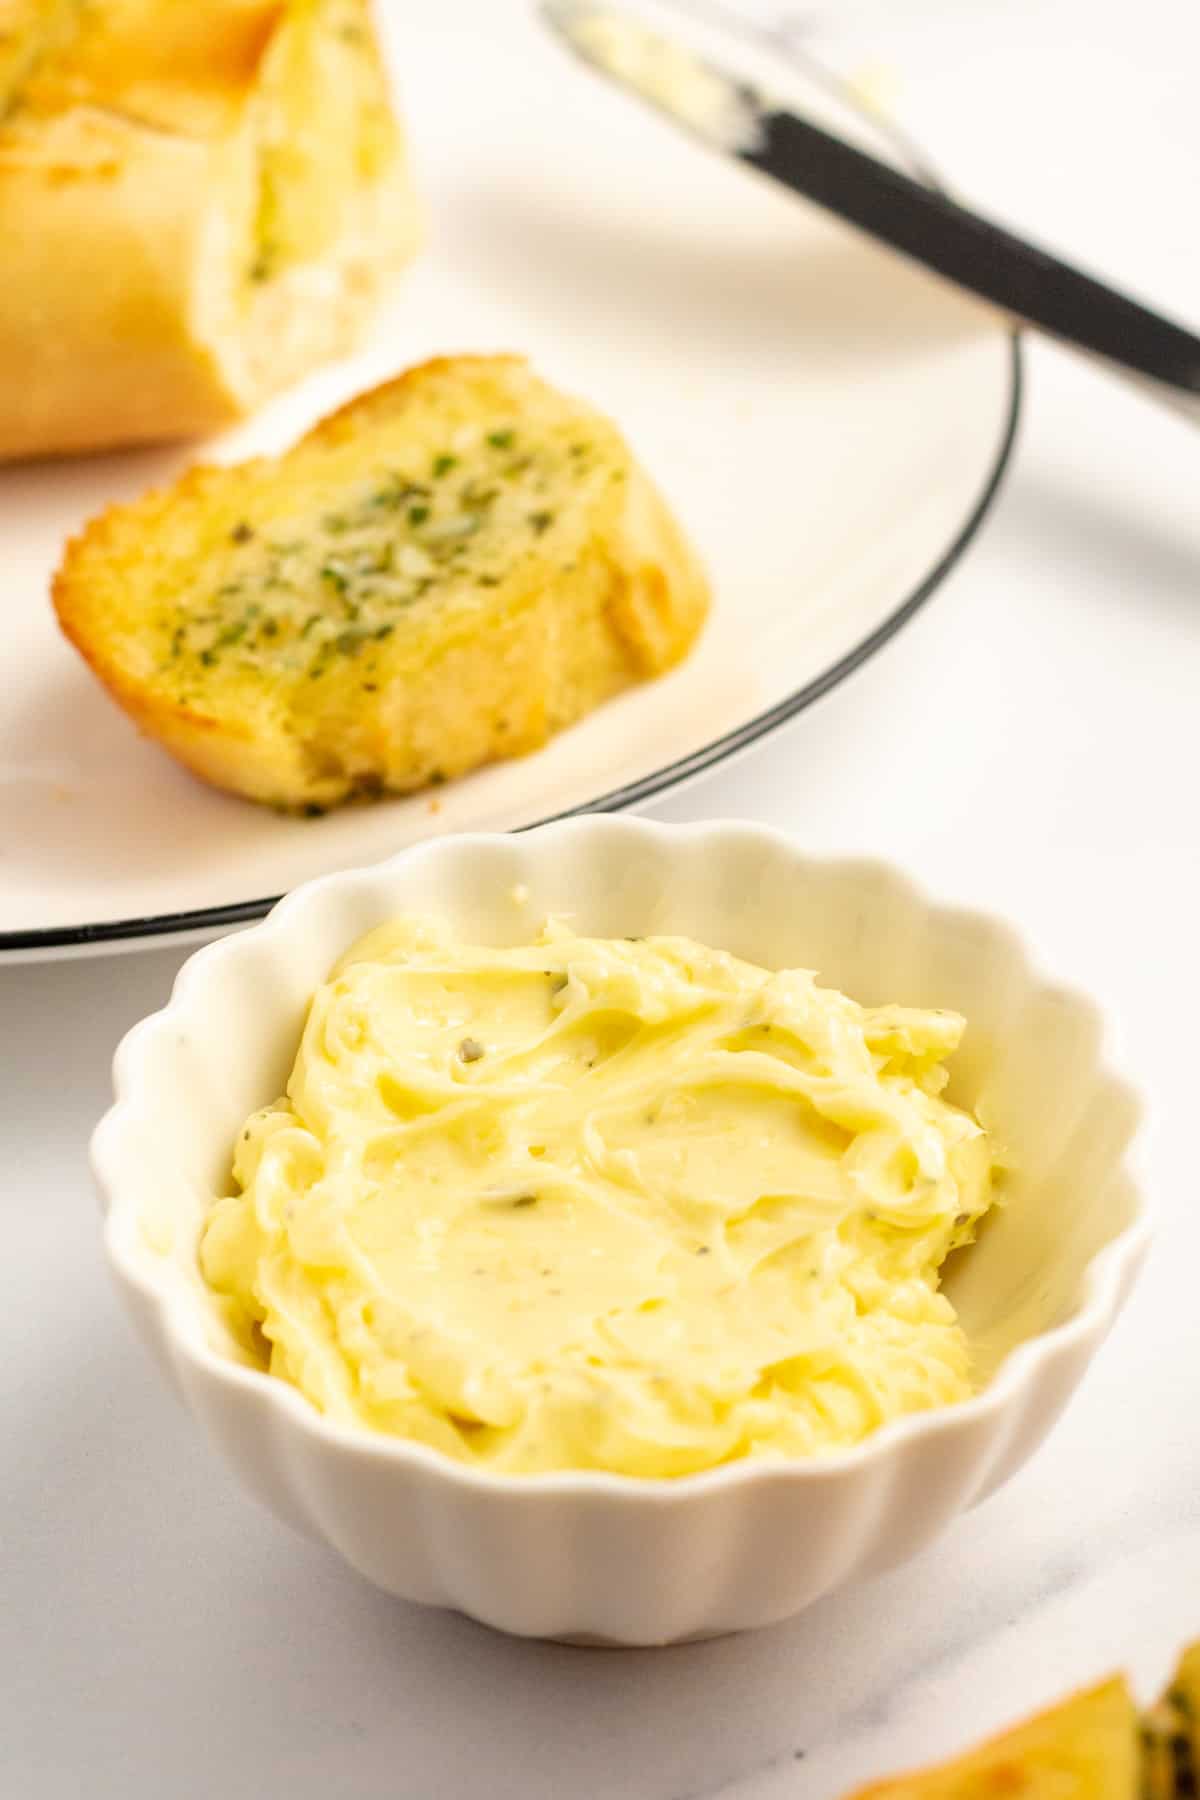 garlic butter served in a small white bowl